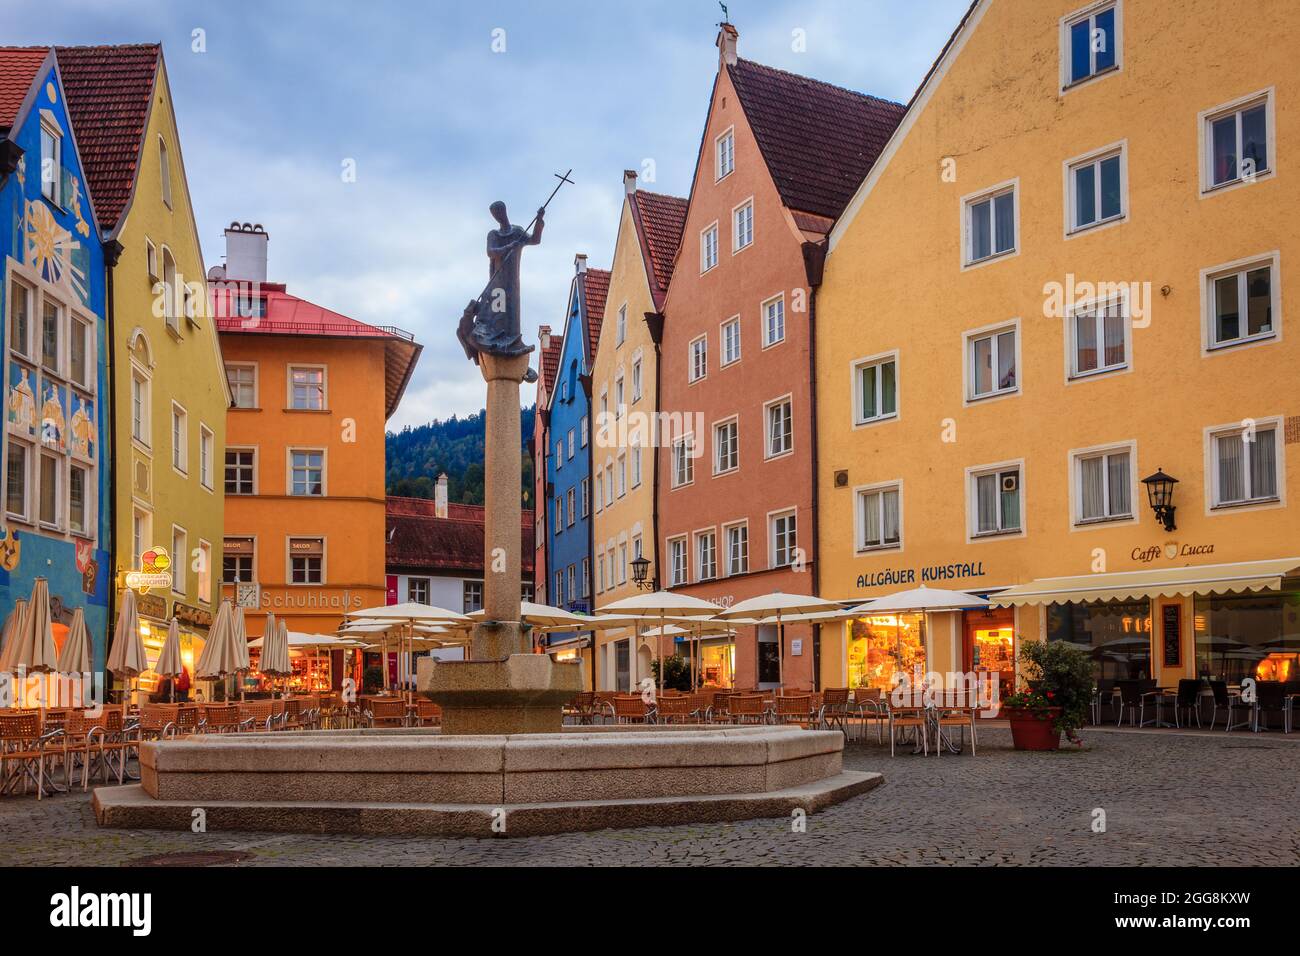 Fussen, Germany, September 27, 2015: Central square in Fussen featuring a landmark fountain - Stadtbrunnen Stock Photo